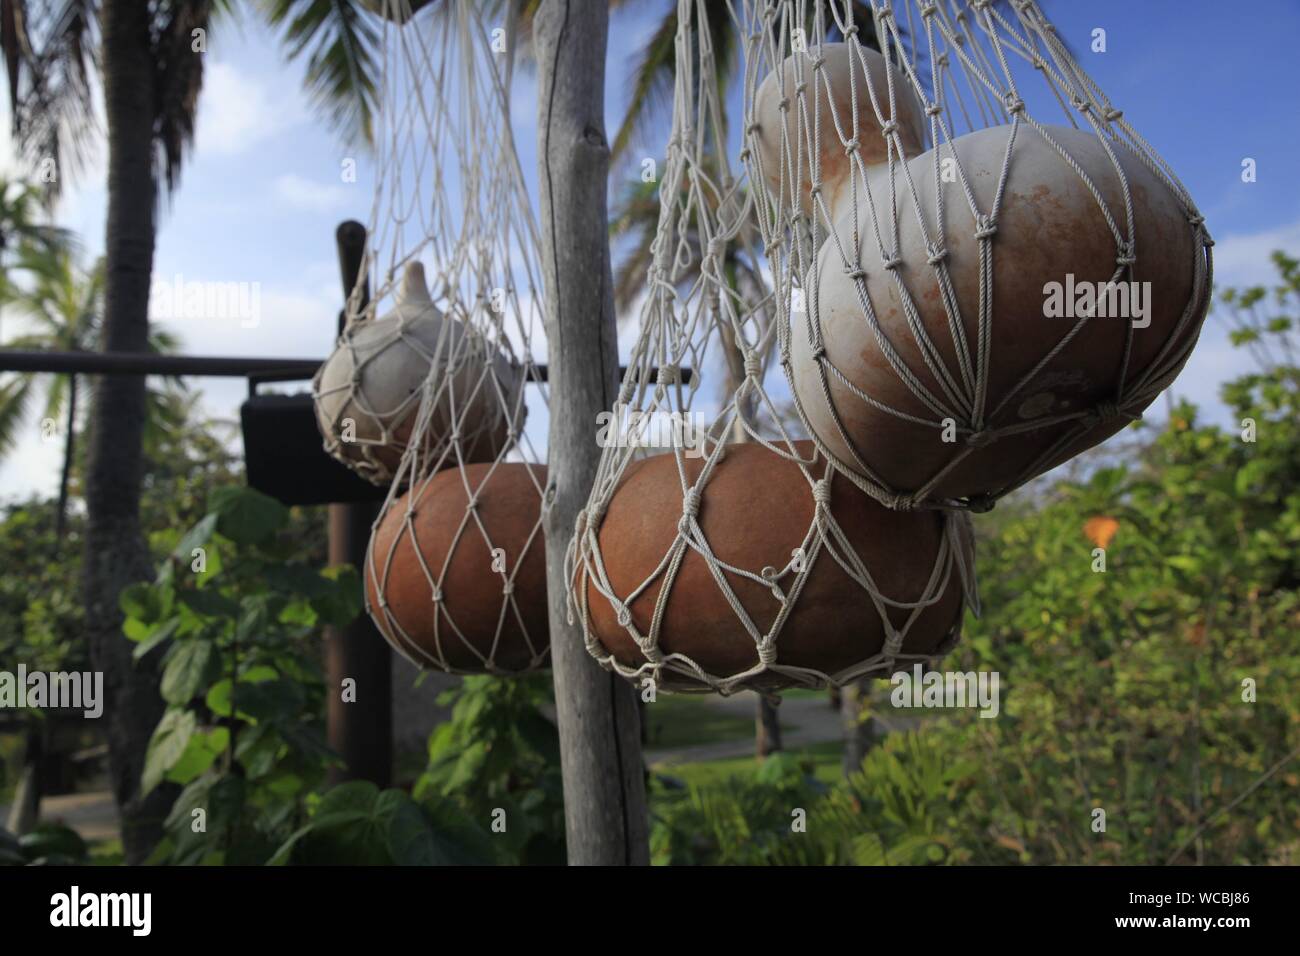 Pots Hanging In Nets Stock Photo